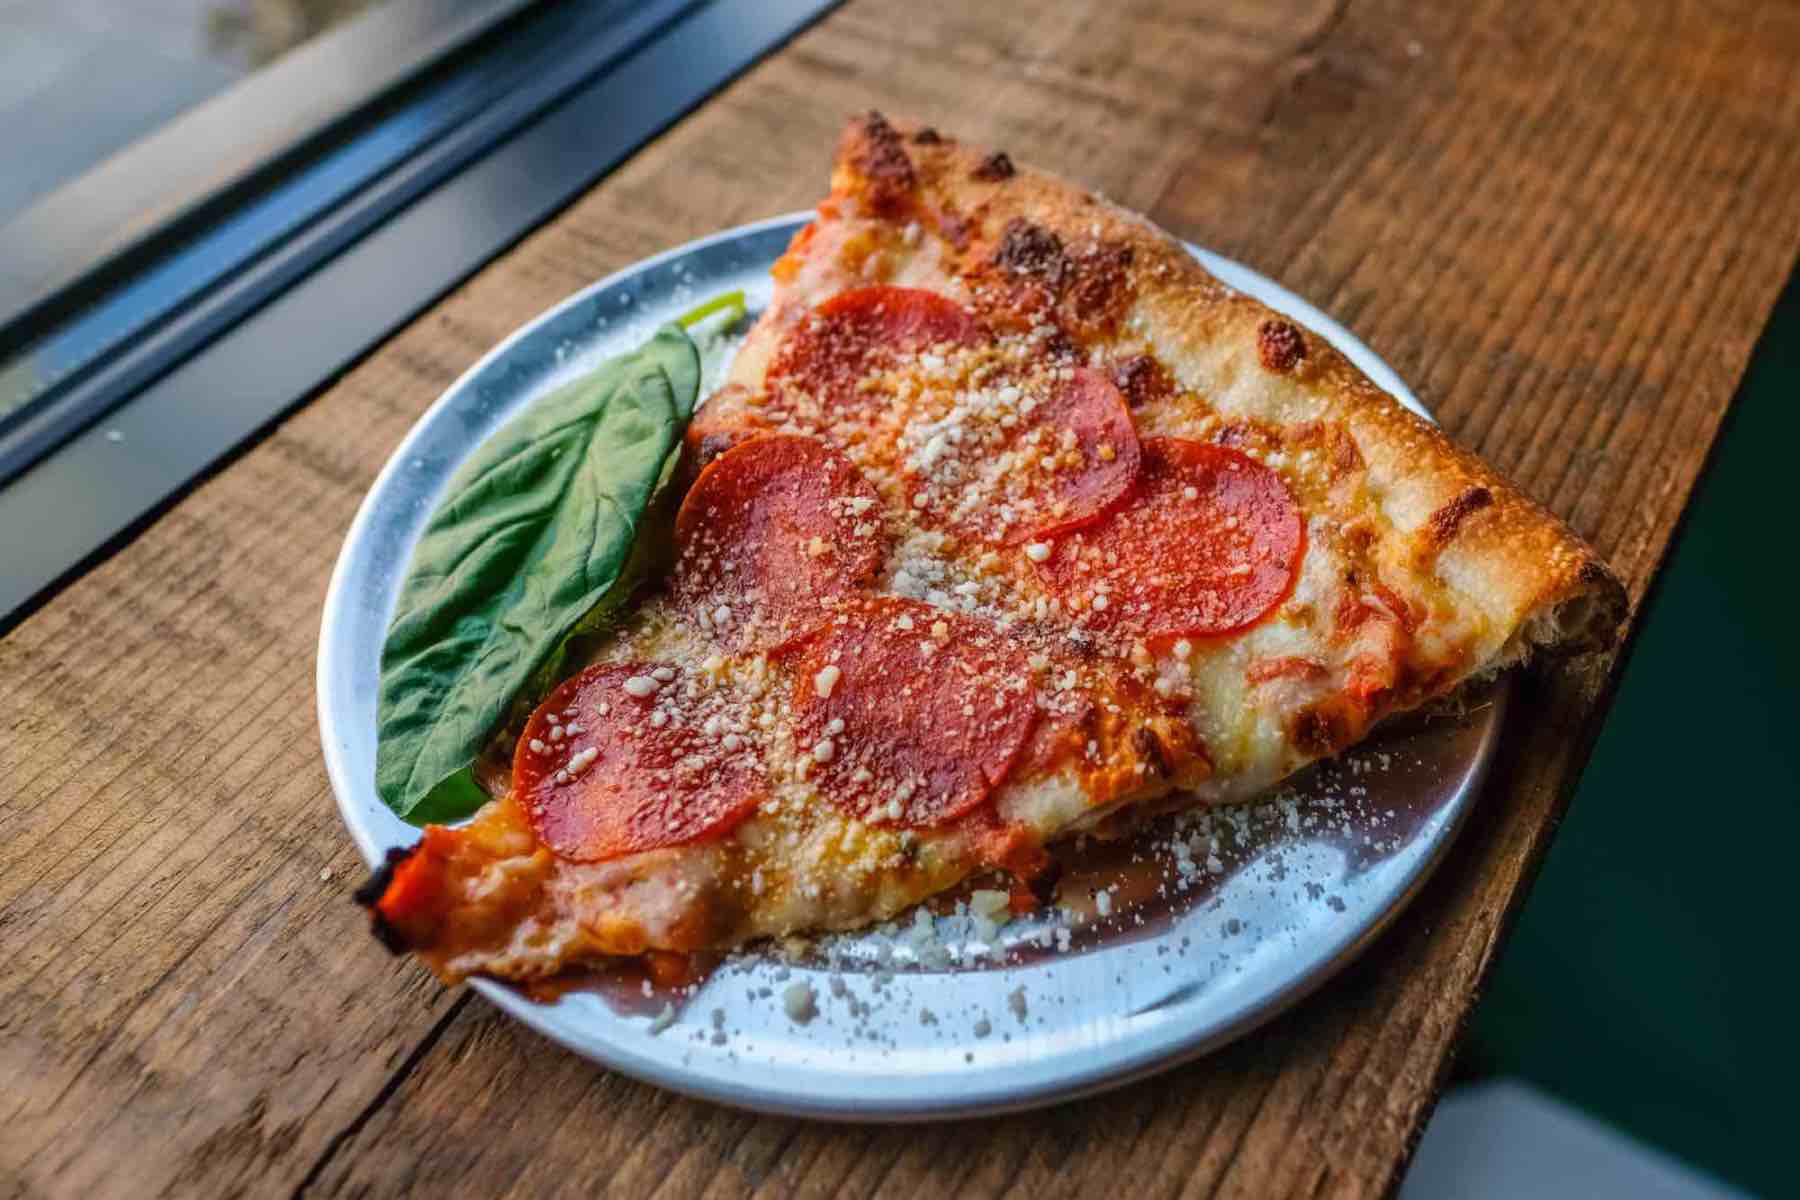 Gooey slice of pepperoni pizza on a metal plate next of a piece of basil.